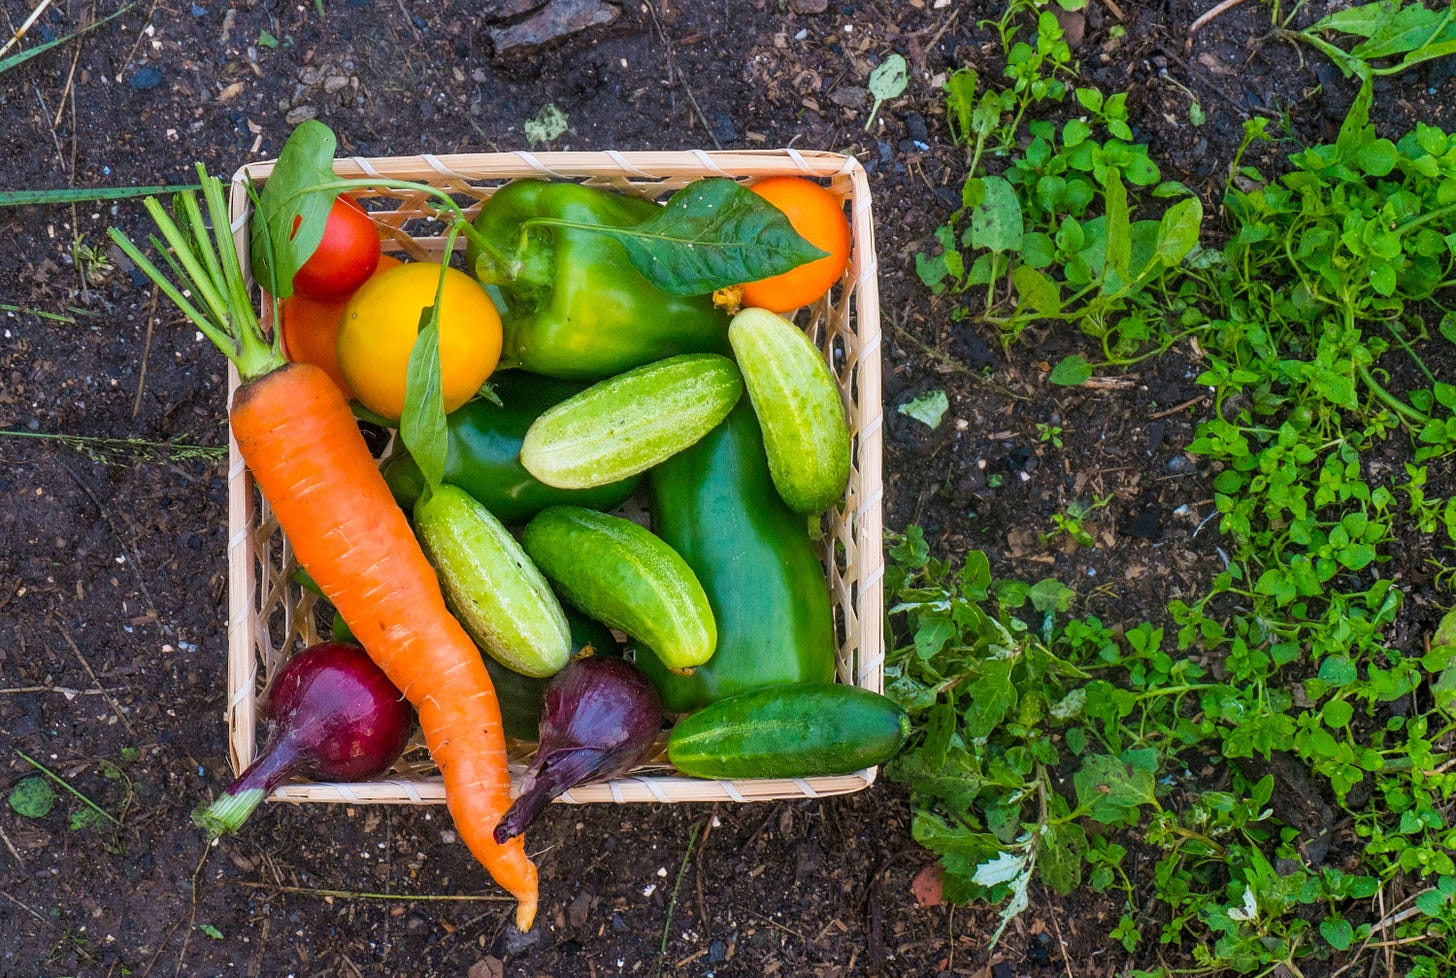 Growing a Vegetable Garden Might Be Just What You Need During the ...